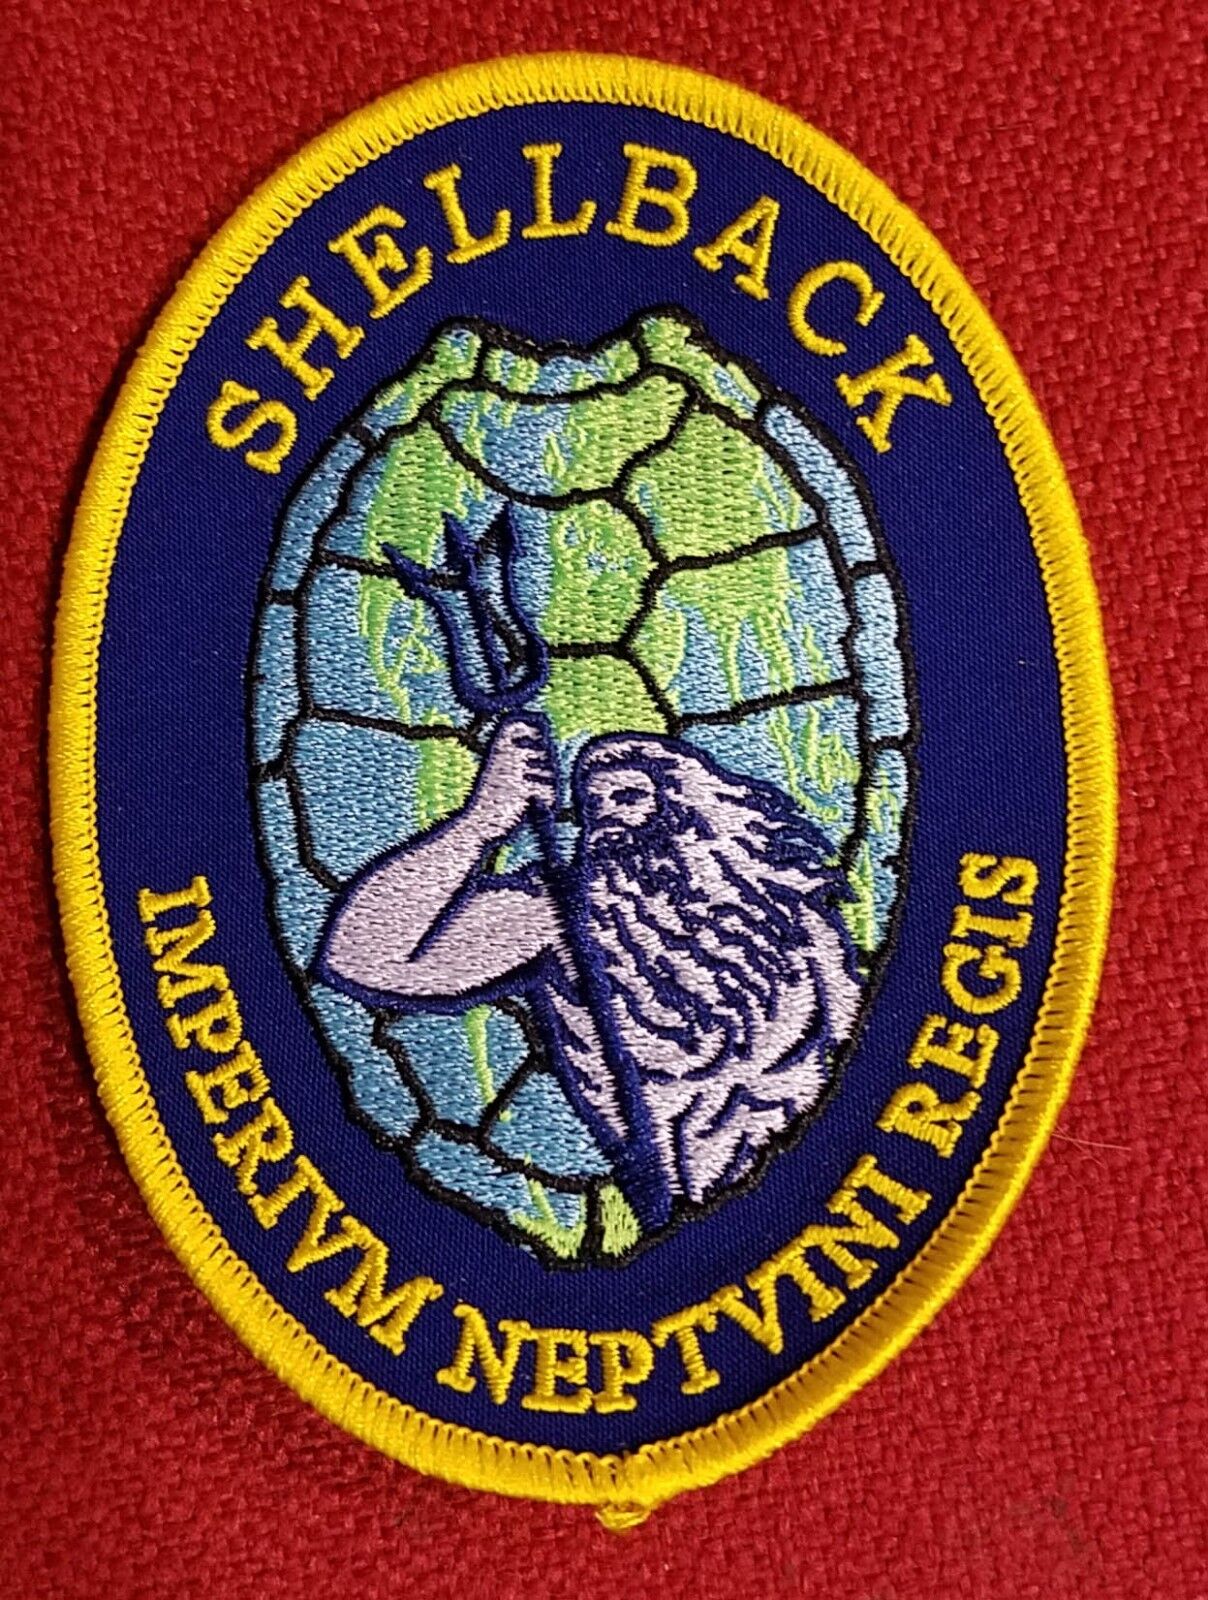 US Navy Shellback patch (Crossing the Equator) 